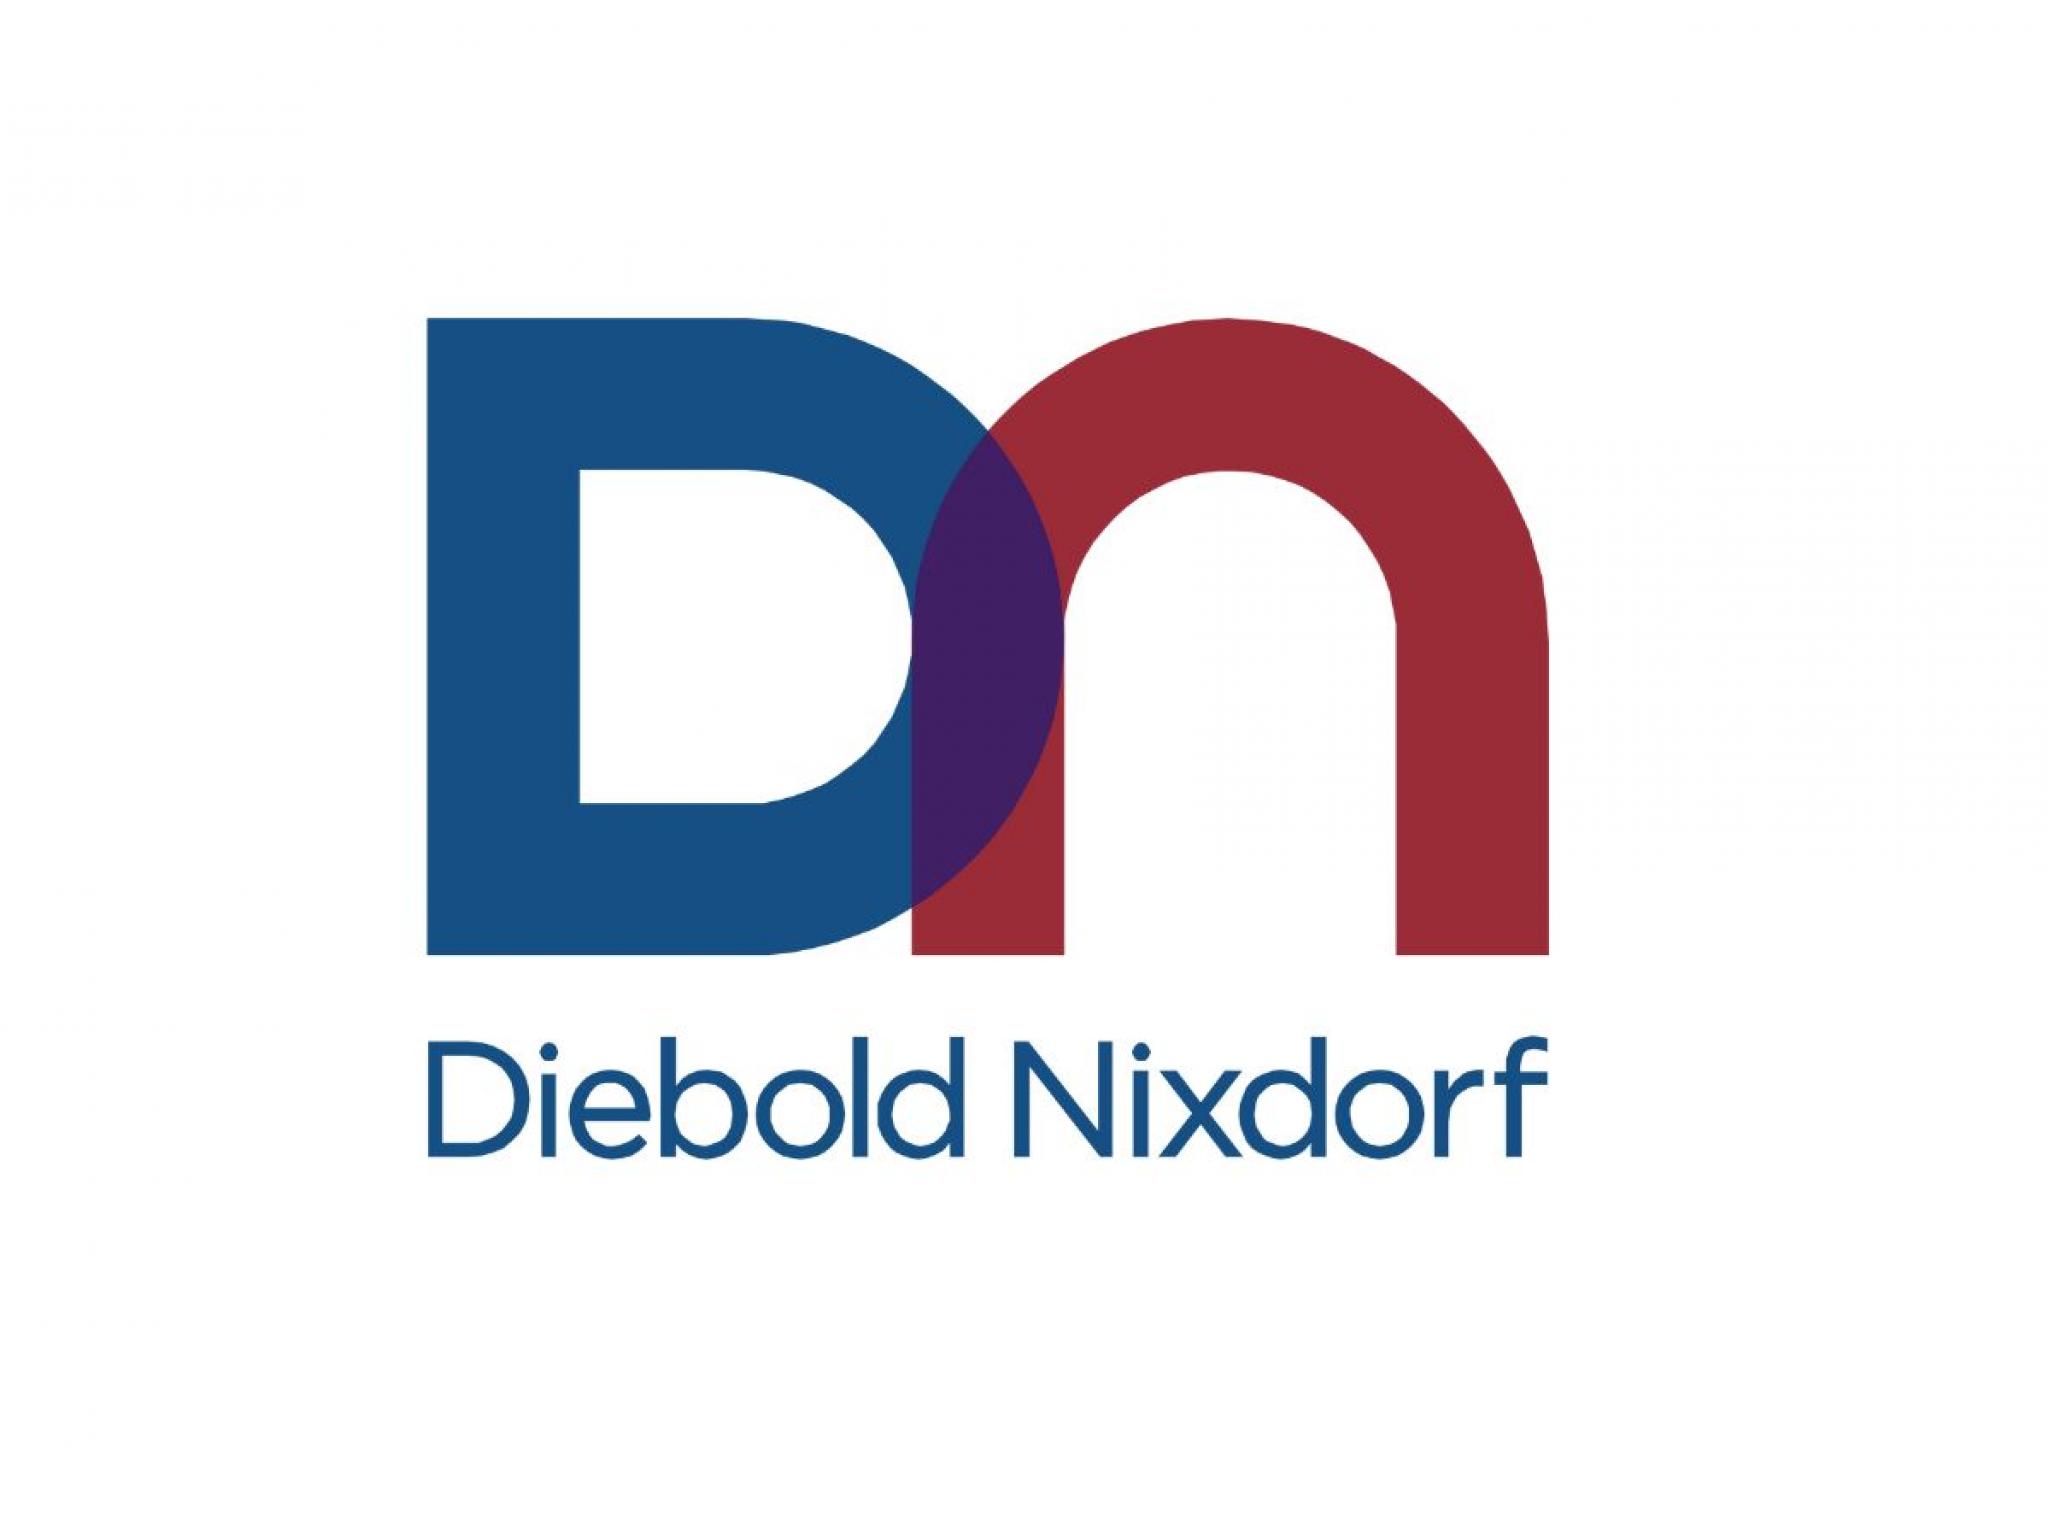  these-analysts-increase-their-forecasts-on-diebold-following-q3-results 